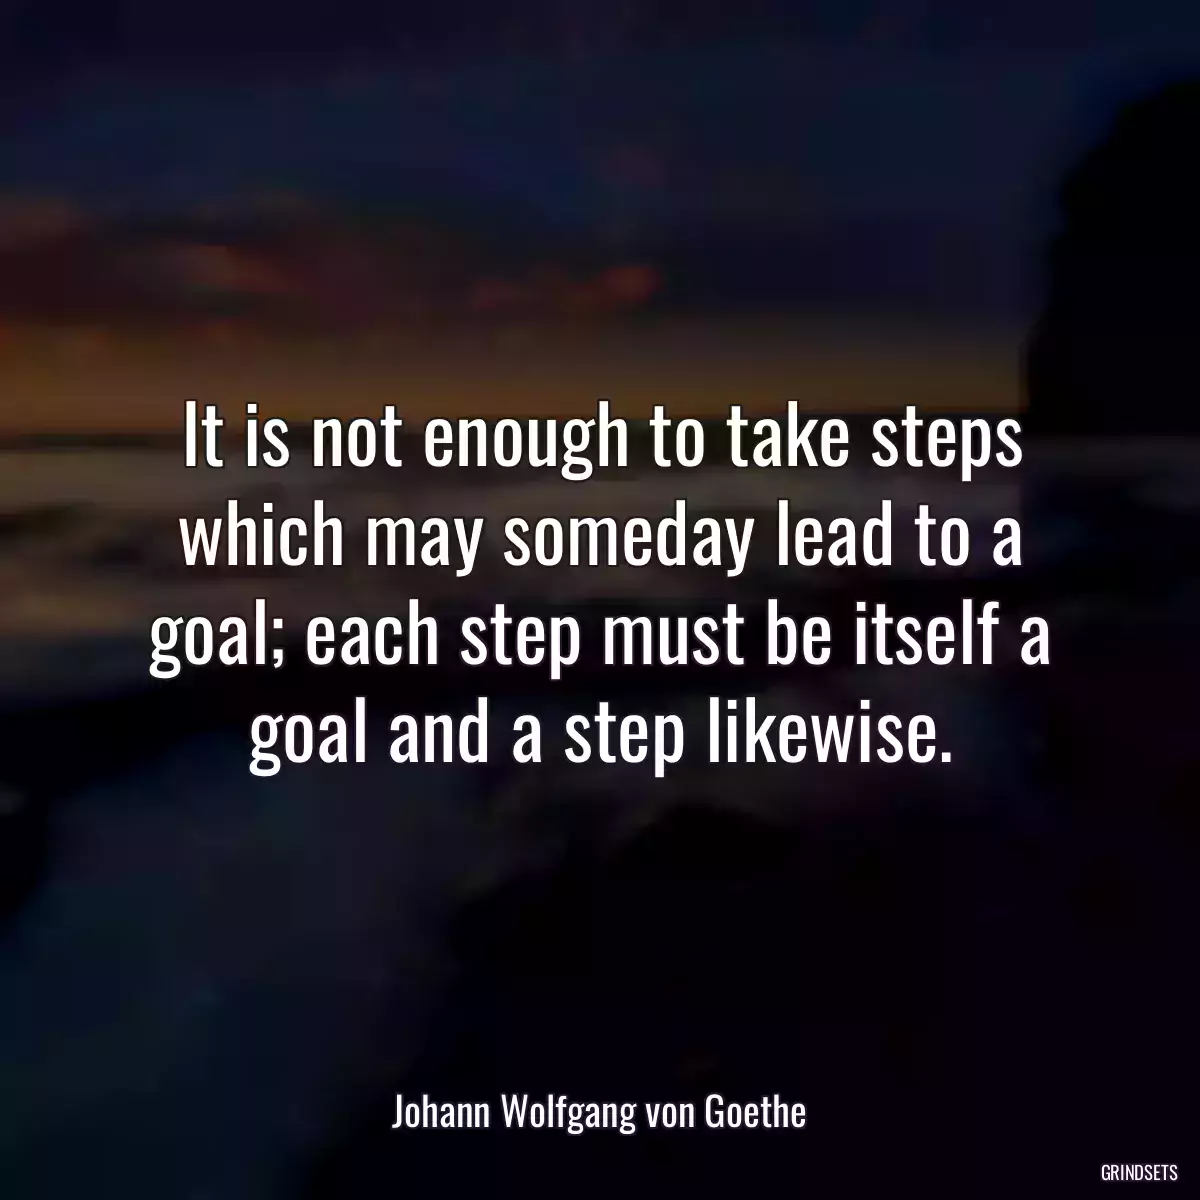 It is not enough to take steps which may someday lead to a goal; each step must be itself a goal and a step likewise.